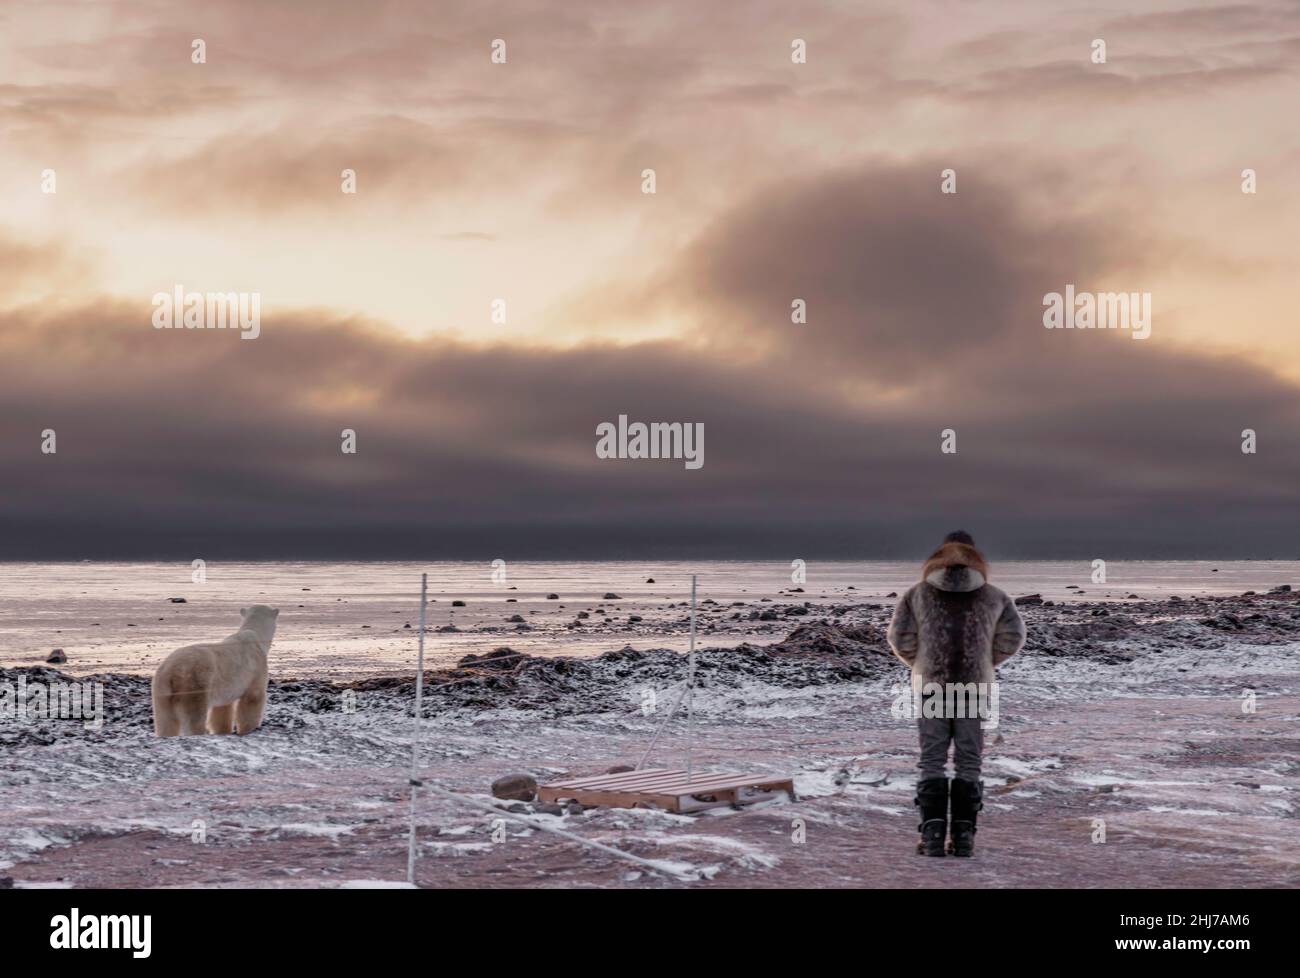 A solitary polar bear and a guide dressed in a fur jacket watch the sunrise over the Hudson Bay, separated by the wire strands of an electric fence Stock Photo